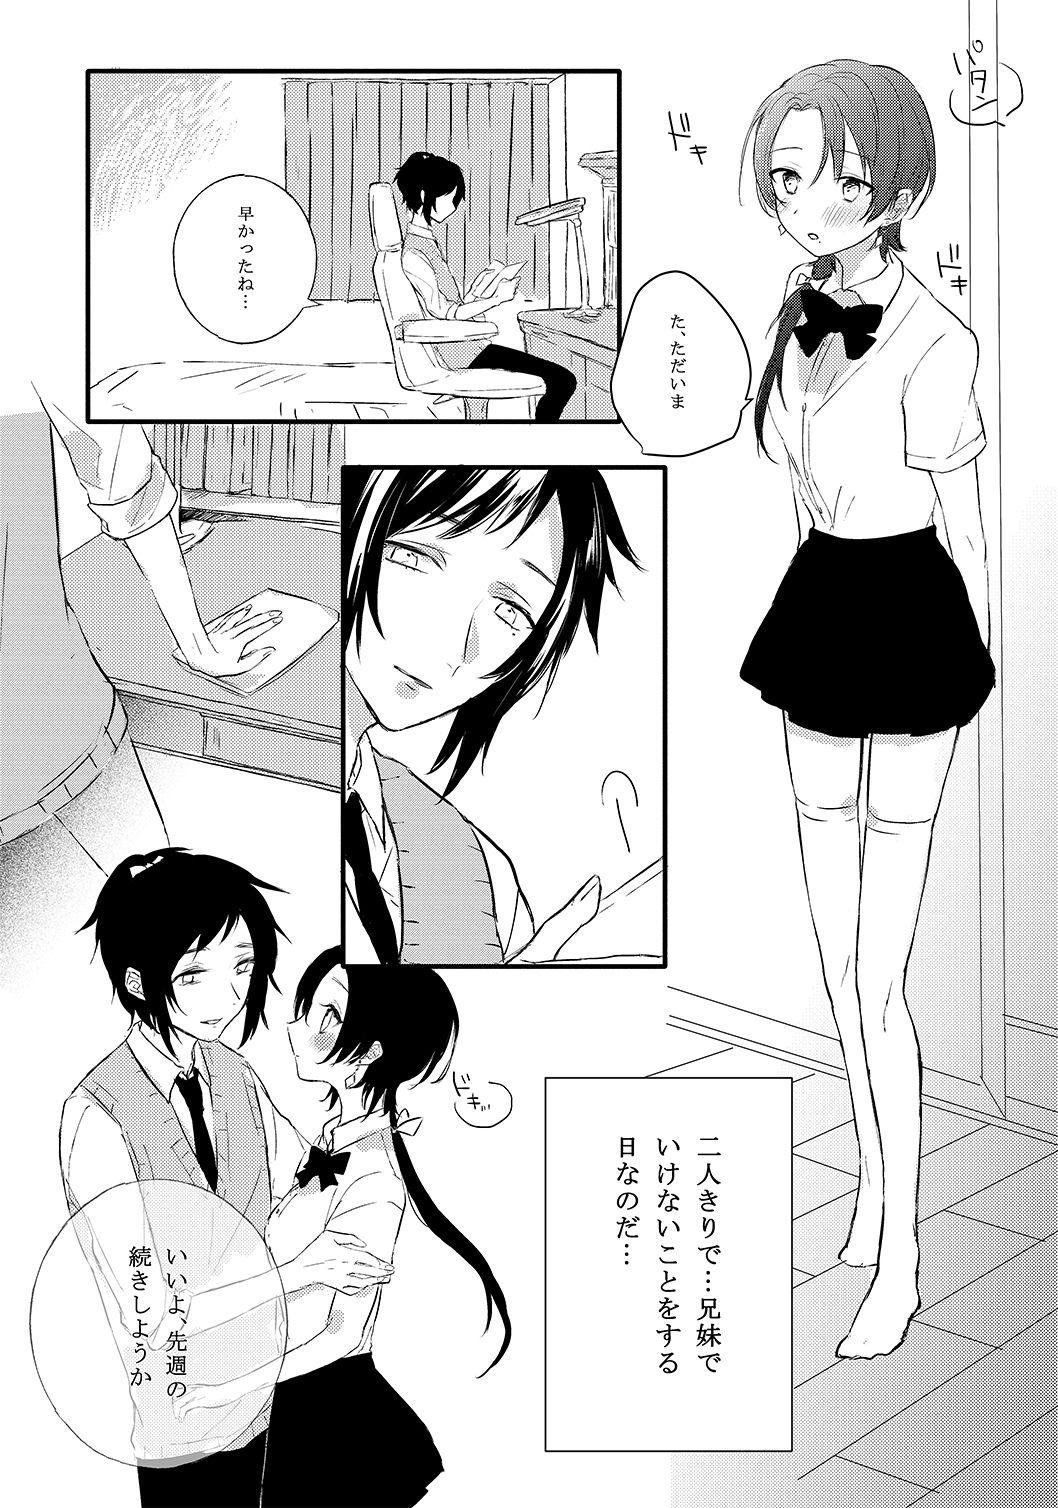 Animated BROTHER COMPLEX + SISTER COMPLEX - Touken ranbu Licking - Page 4